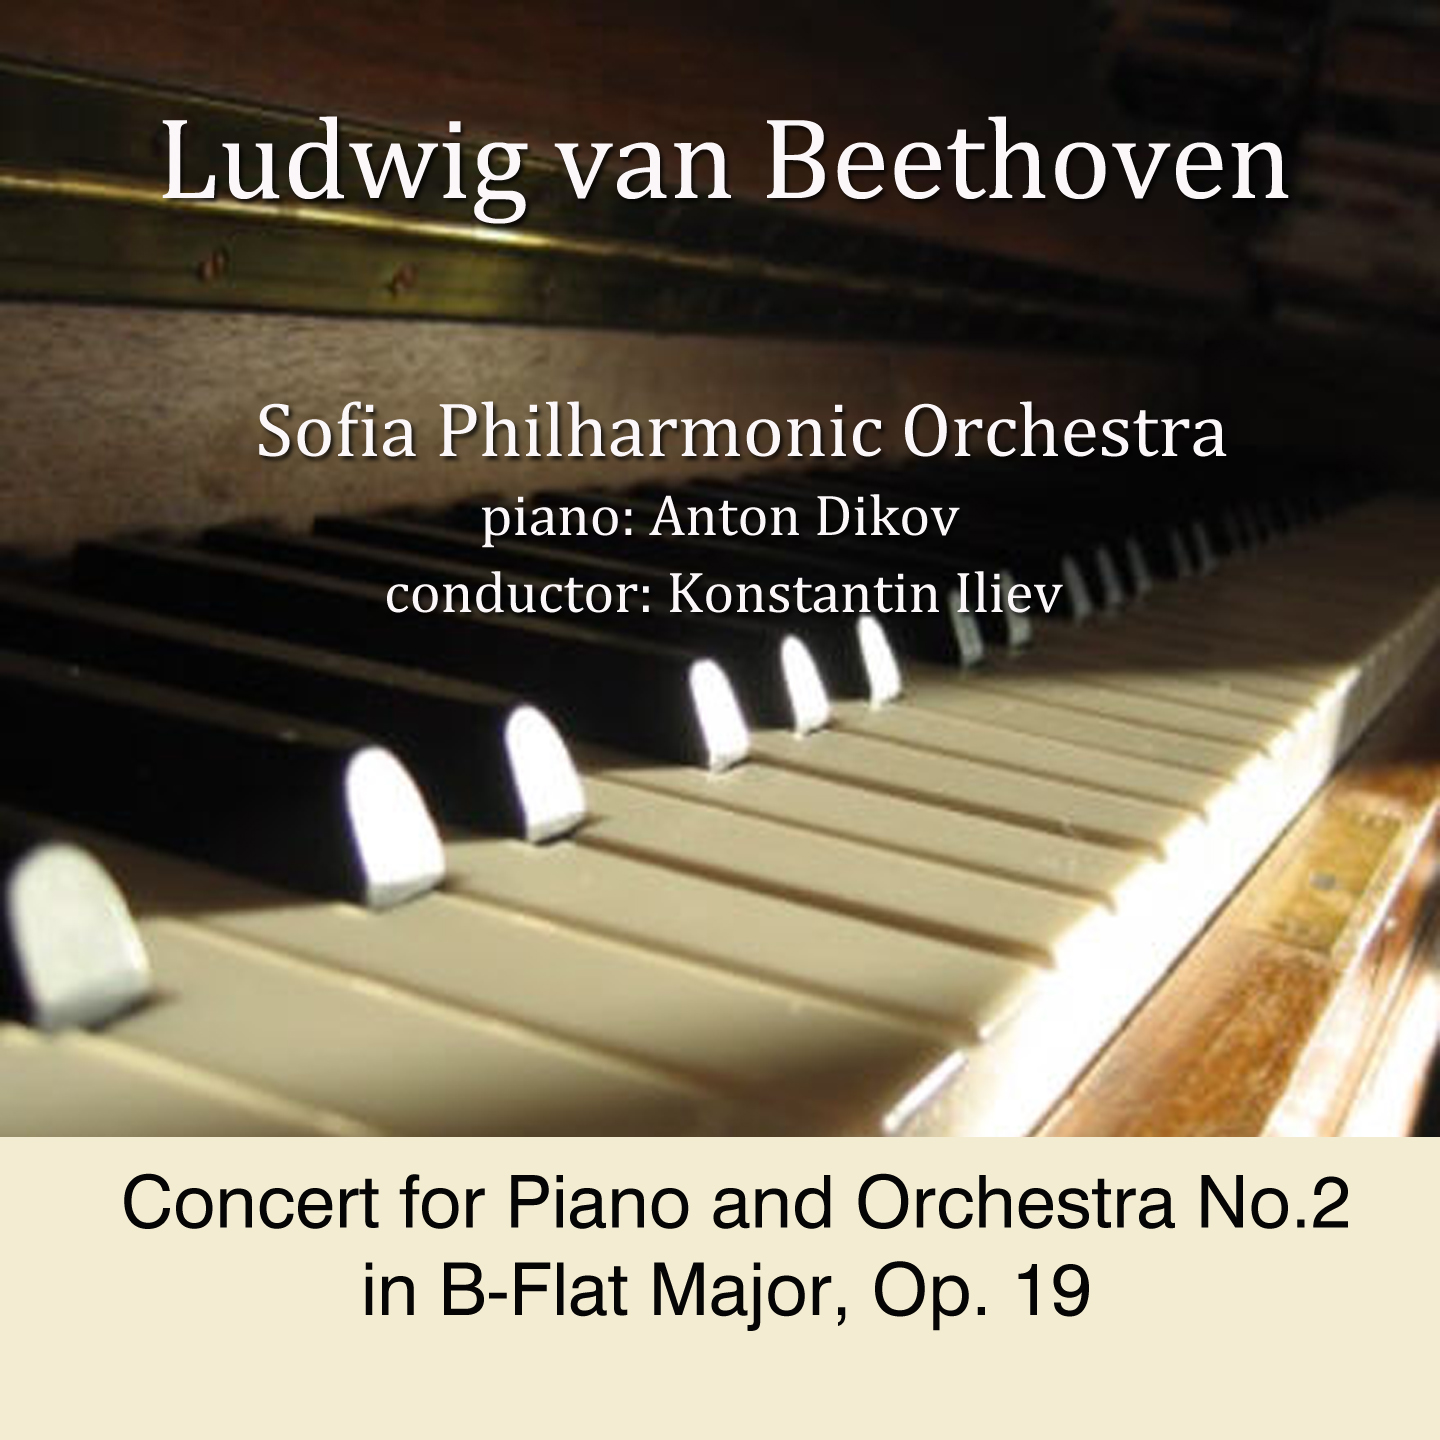 Ludwig van Beethoven: Concert for Piano and Orchestra No.2 in B-Flat Major, Op. 19